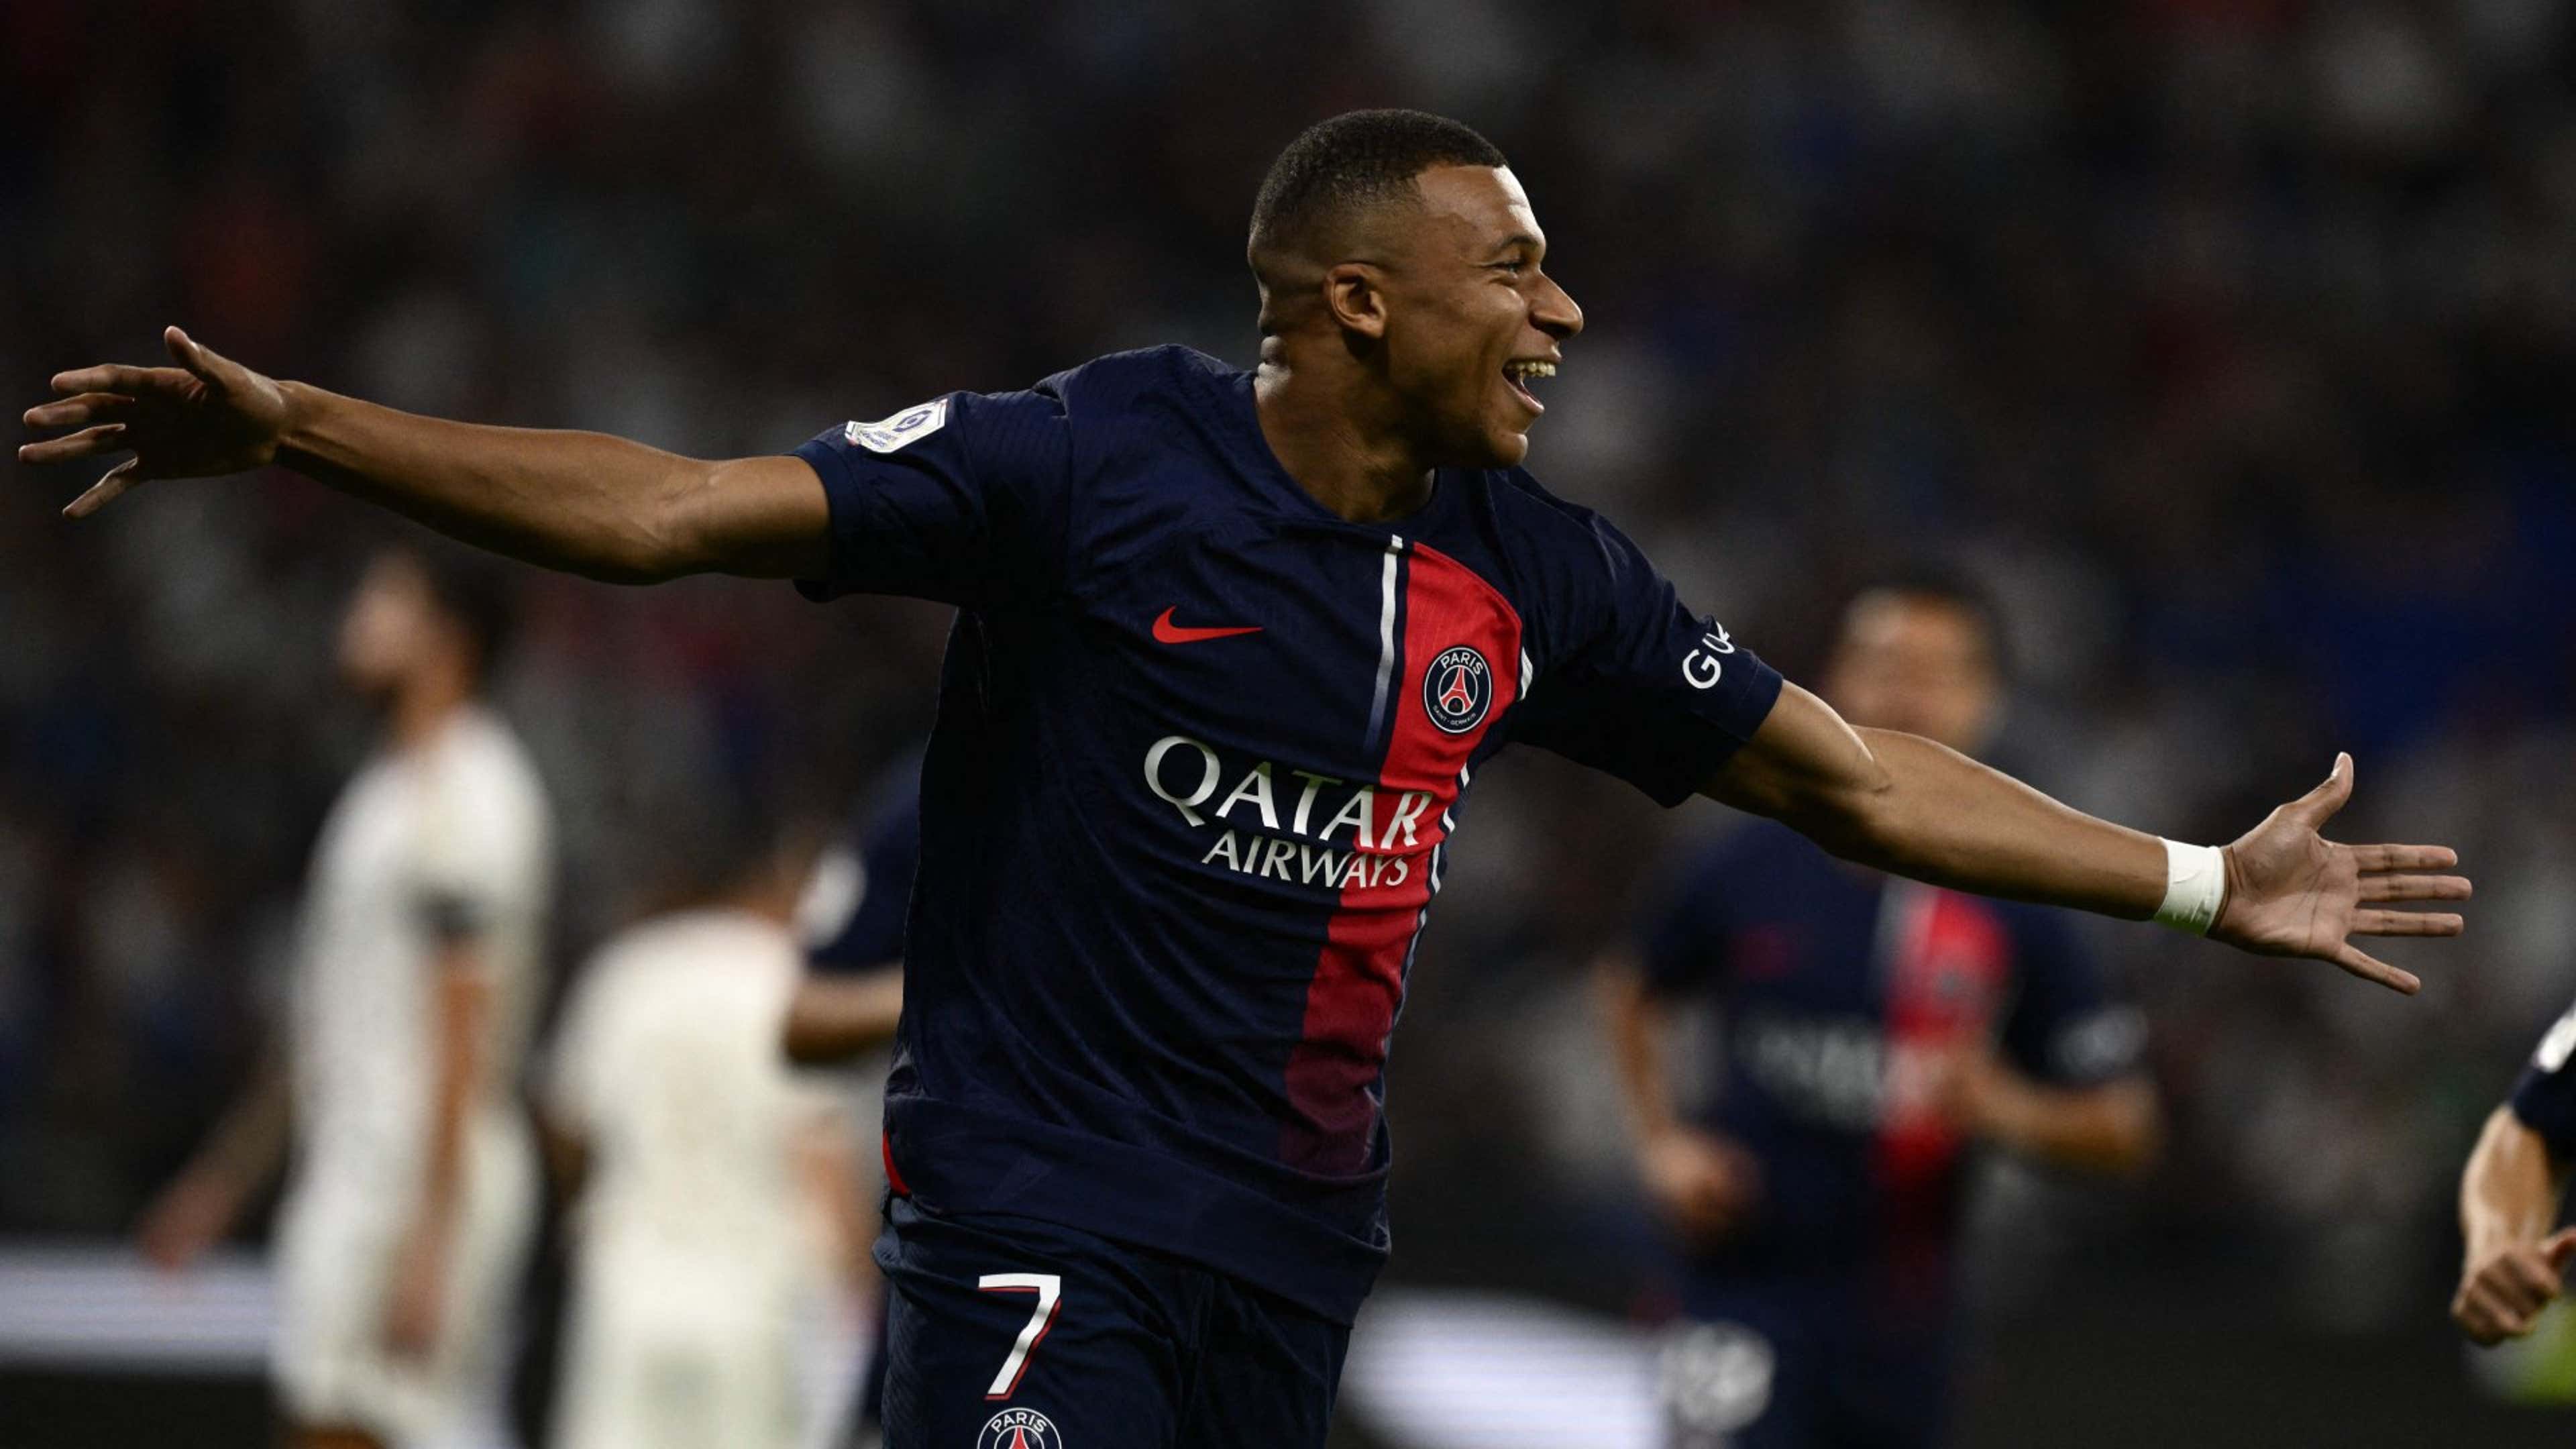 PSG-Nice preview: Mbappé set to play